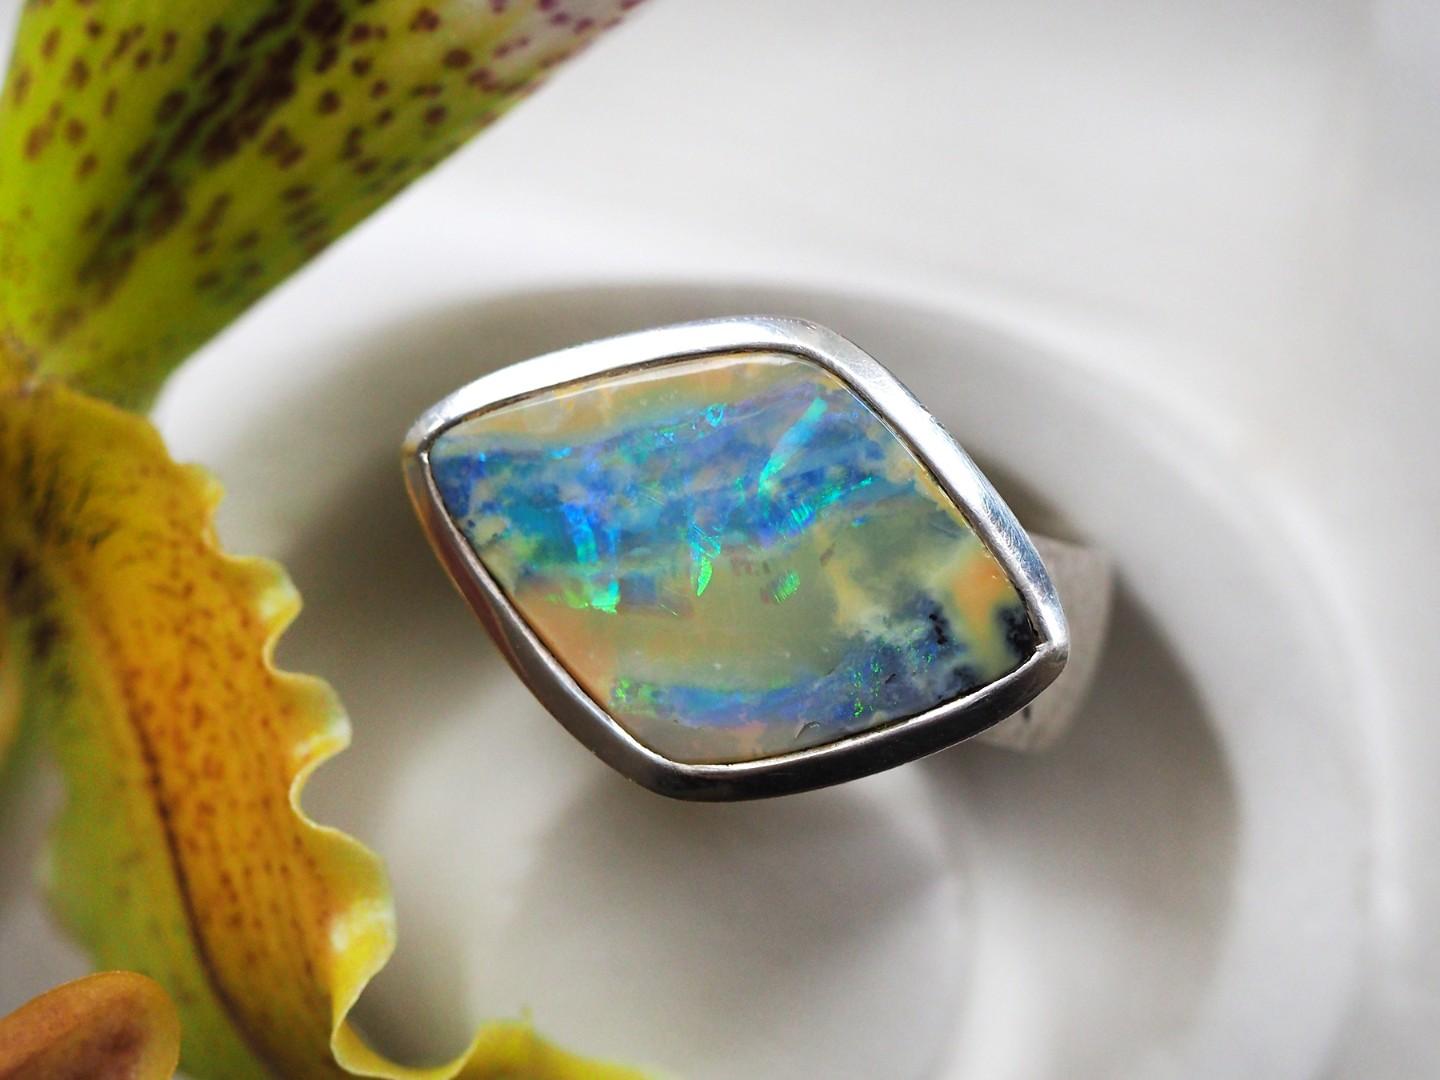 Cabochon Big Opal Silver Ring Bicolor Blue Yellow Australian Unisex Jewelry For Sale